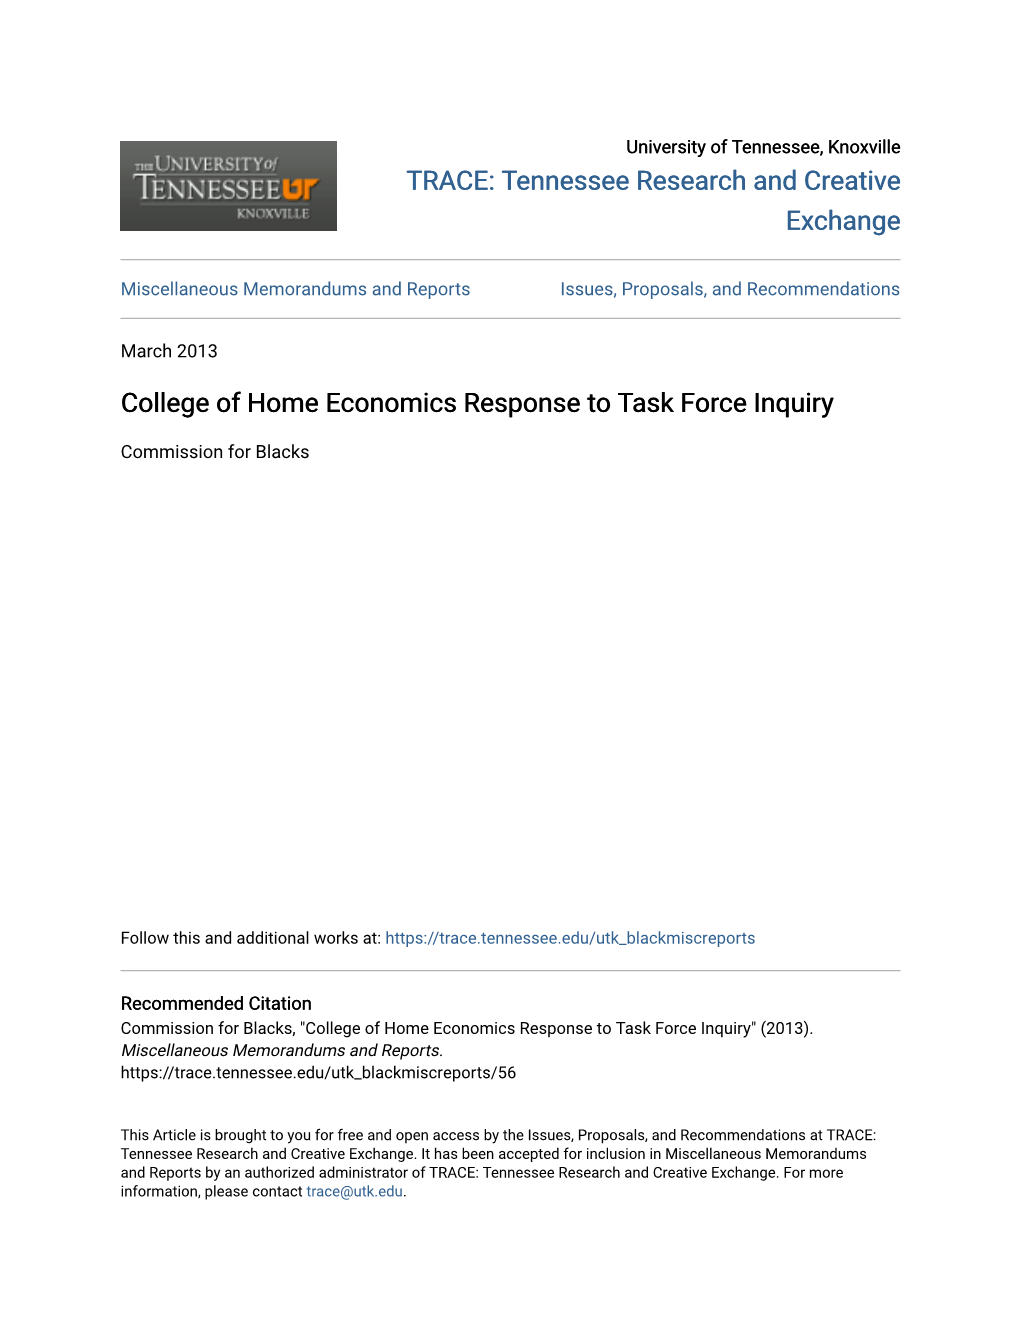 College of Home Economics Response to Task Force Inquiry